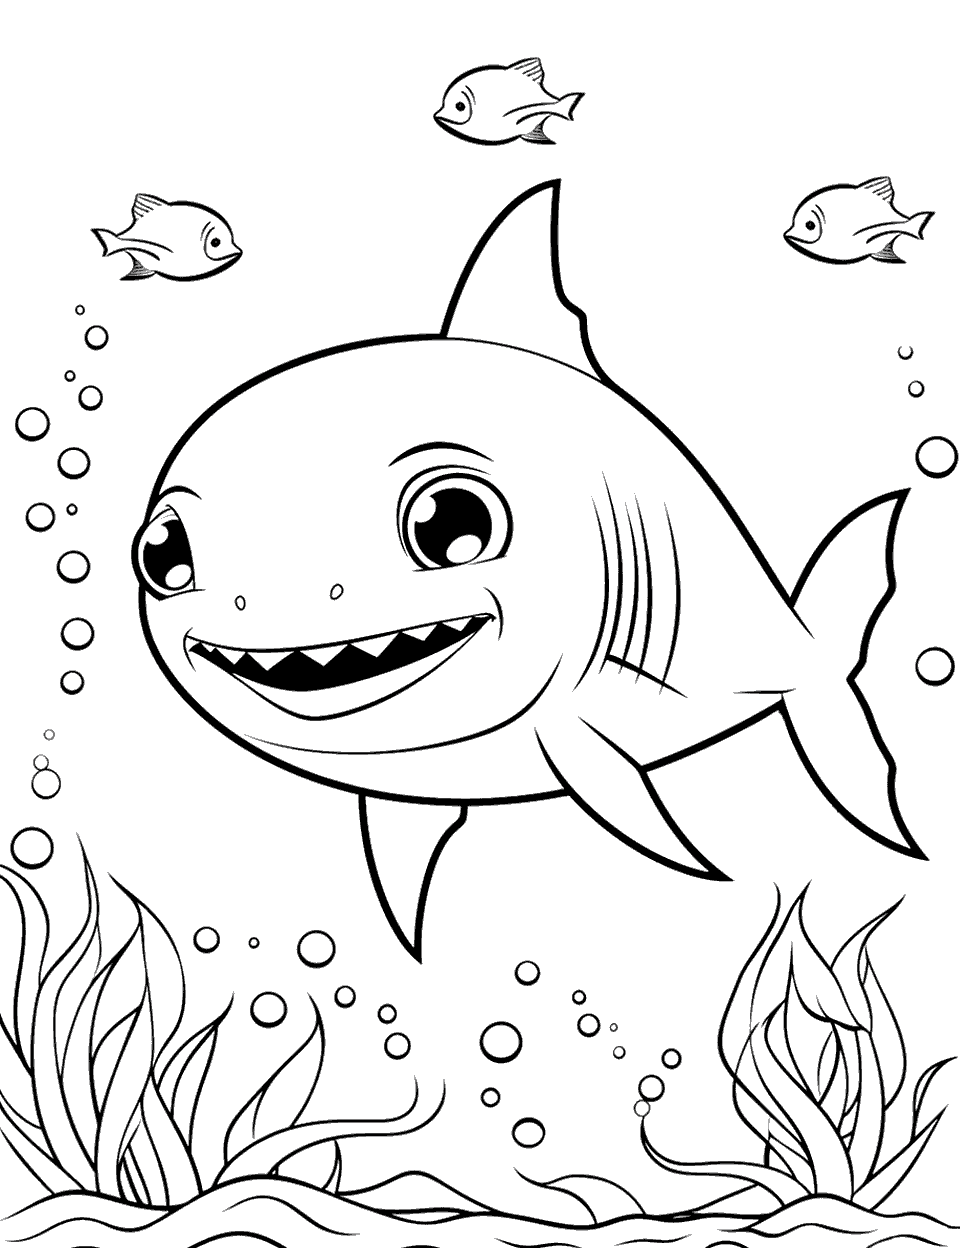 Coral Baby Shark Coloring Page - A Baby Shark exploring a coral reef.